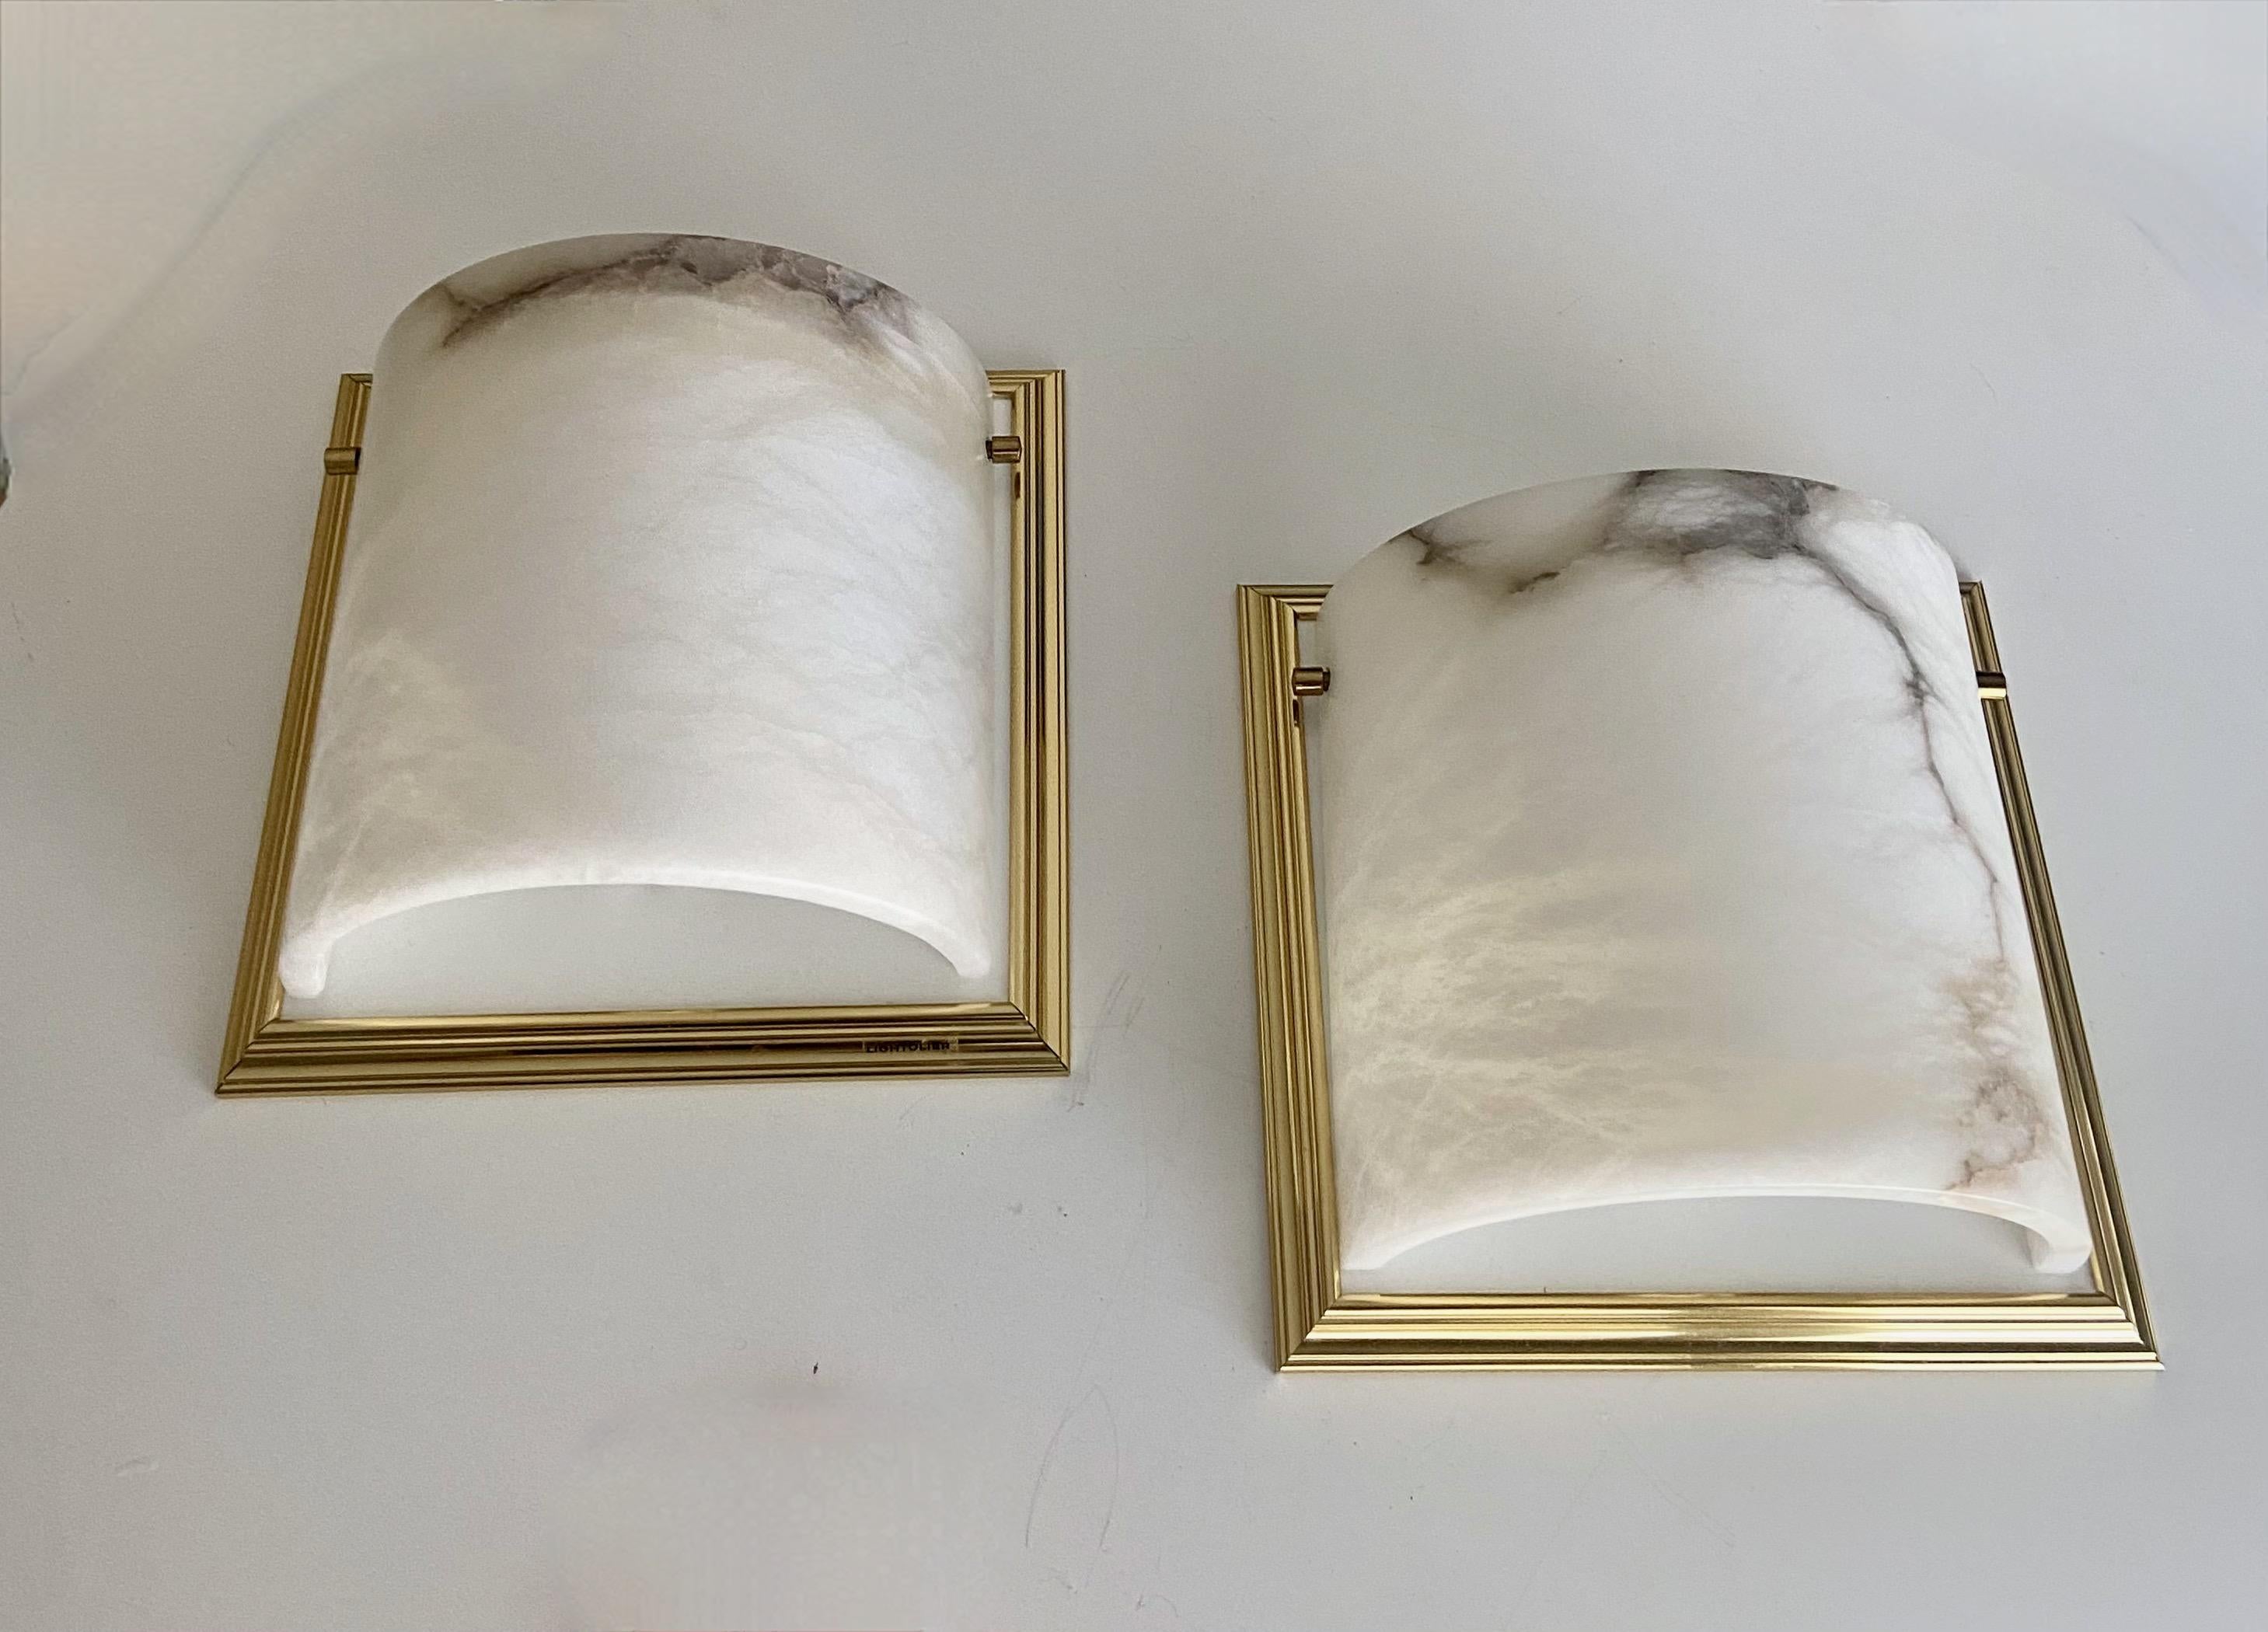 Pair Lightolier curved alabaster wall light sconces with brass fittings and brass plated trim backplates. Each uses single 60 watt regular A size bulb. Second pair available.